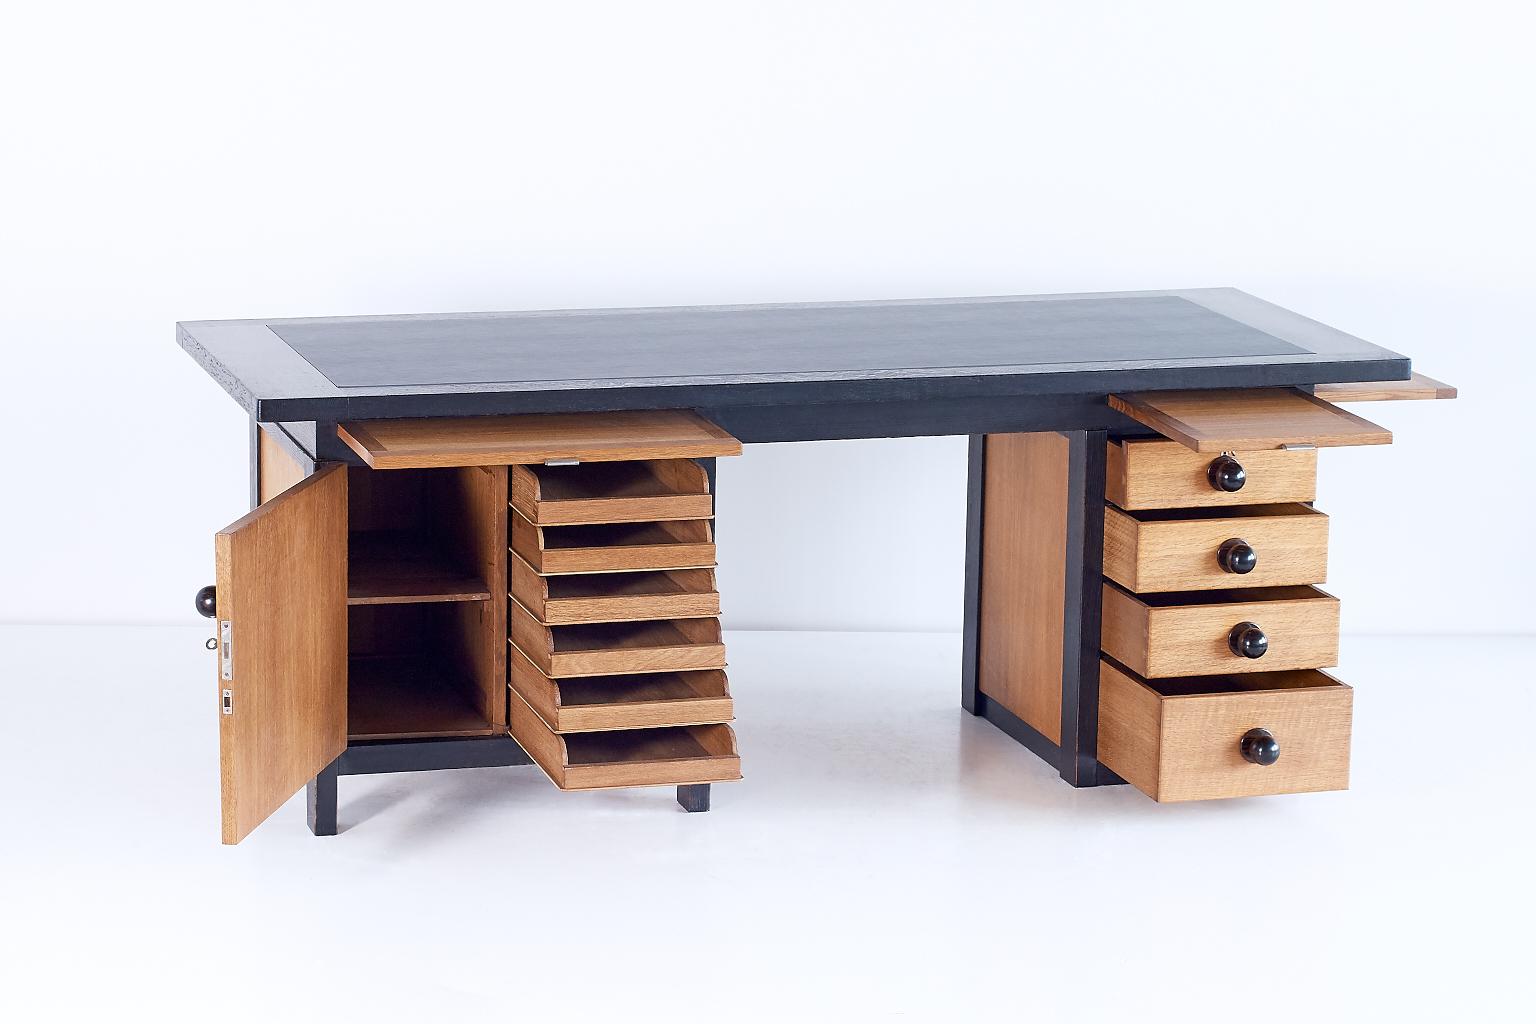 Frits Spanjaard Important Asymmetrical Desk in Oak and Macassar Ebony, 1932 In Good Condition For Sale In The Hague, NL